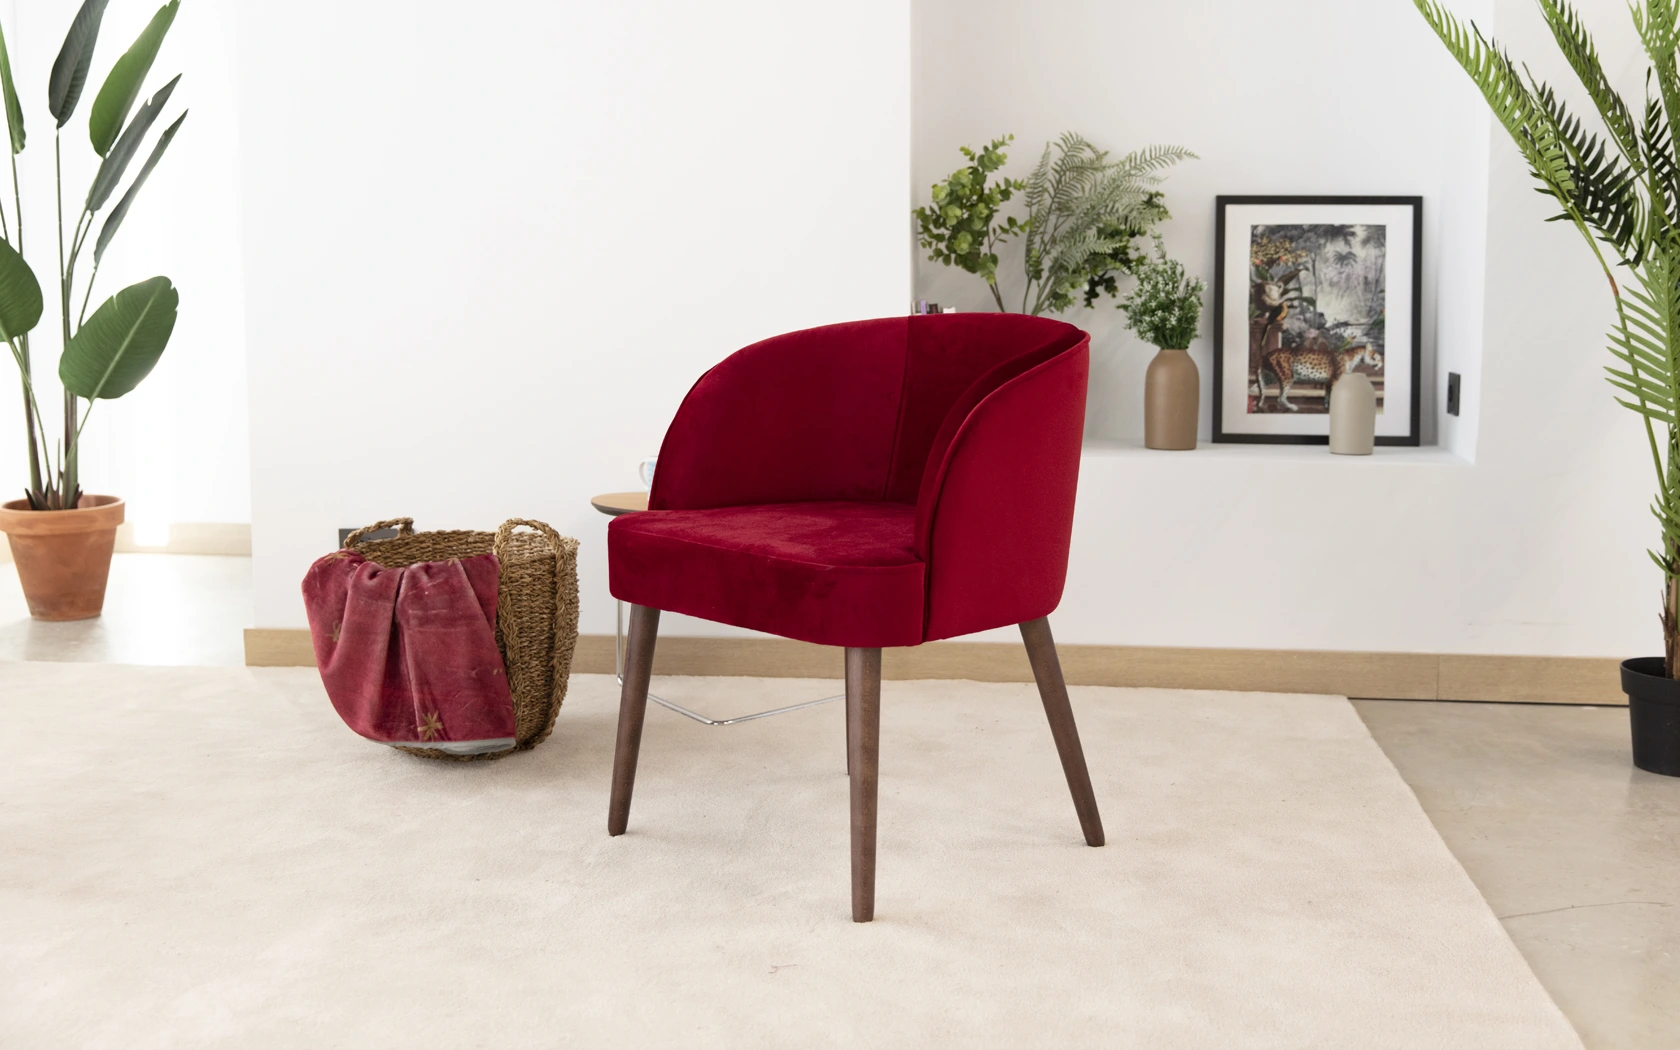 Draco modern upholstered dining chair.